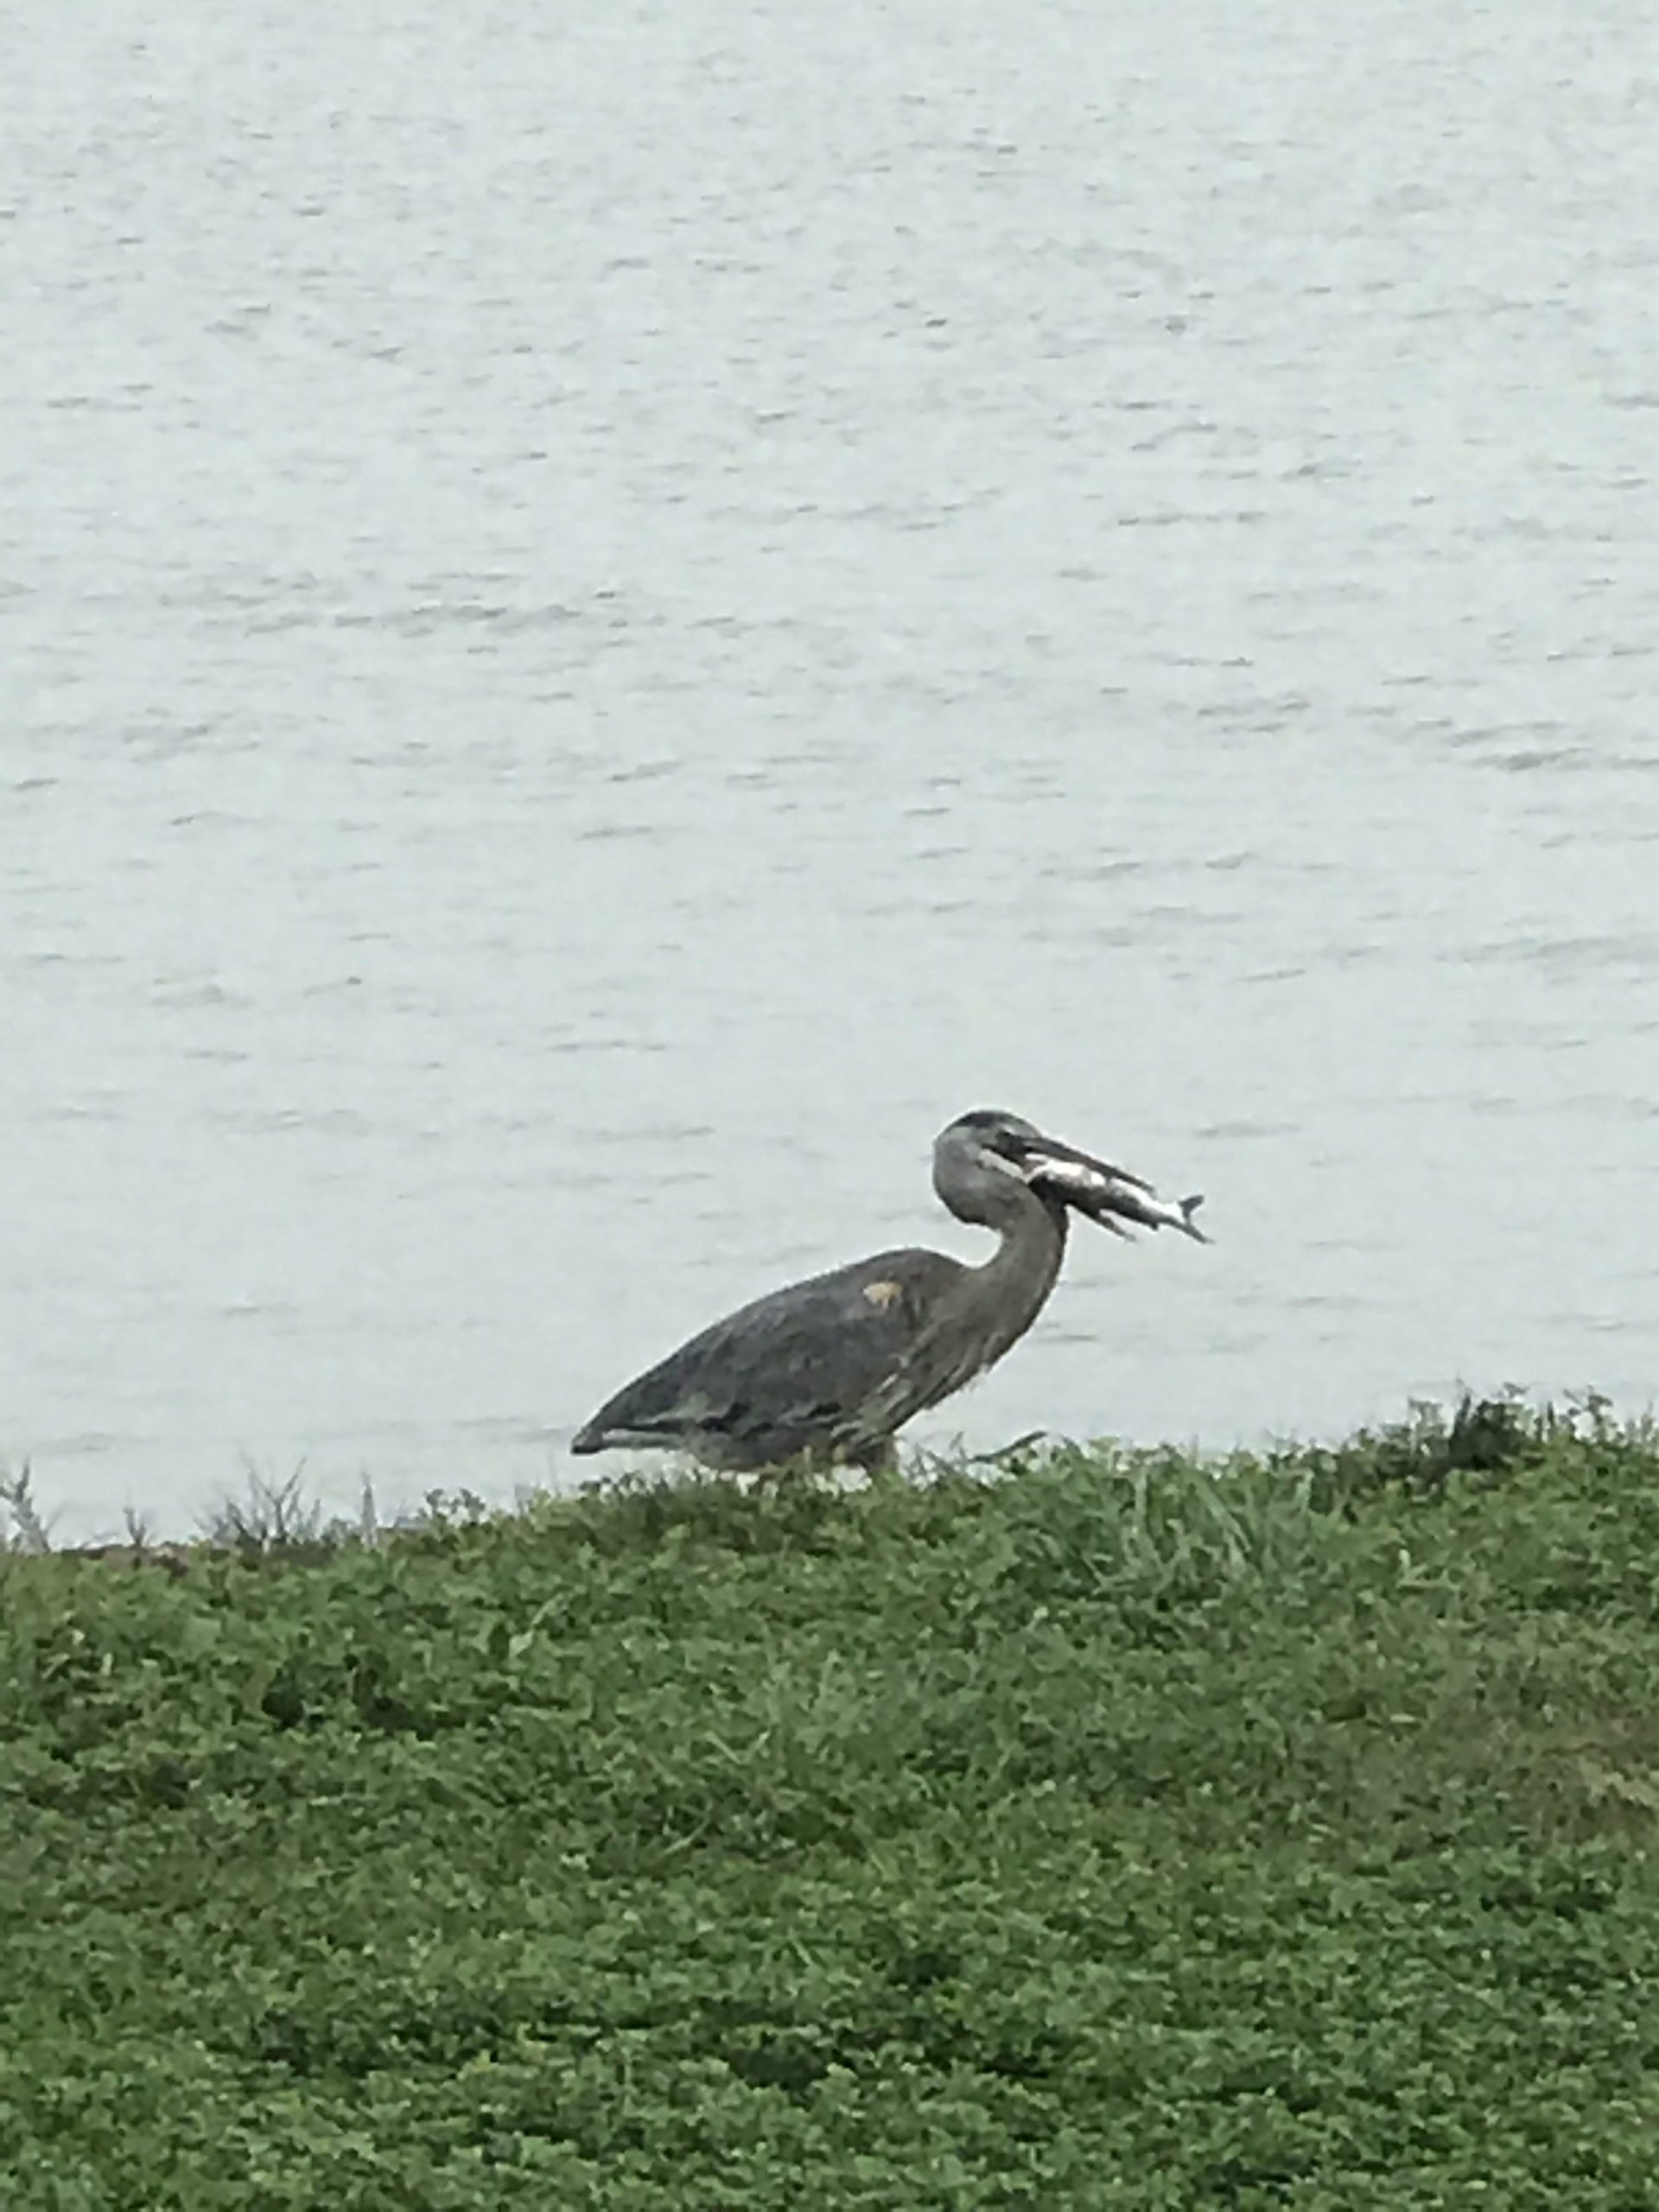 Great Blue Heron with Gafftopsail Catfish